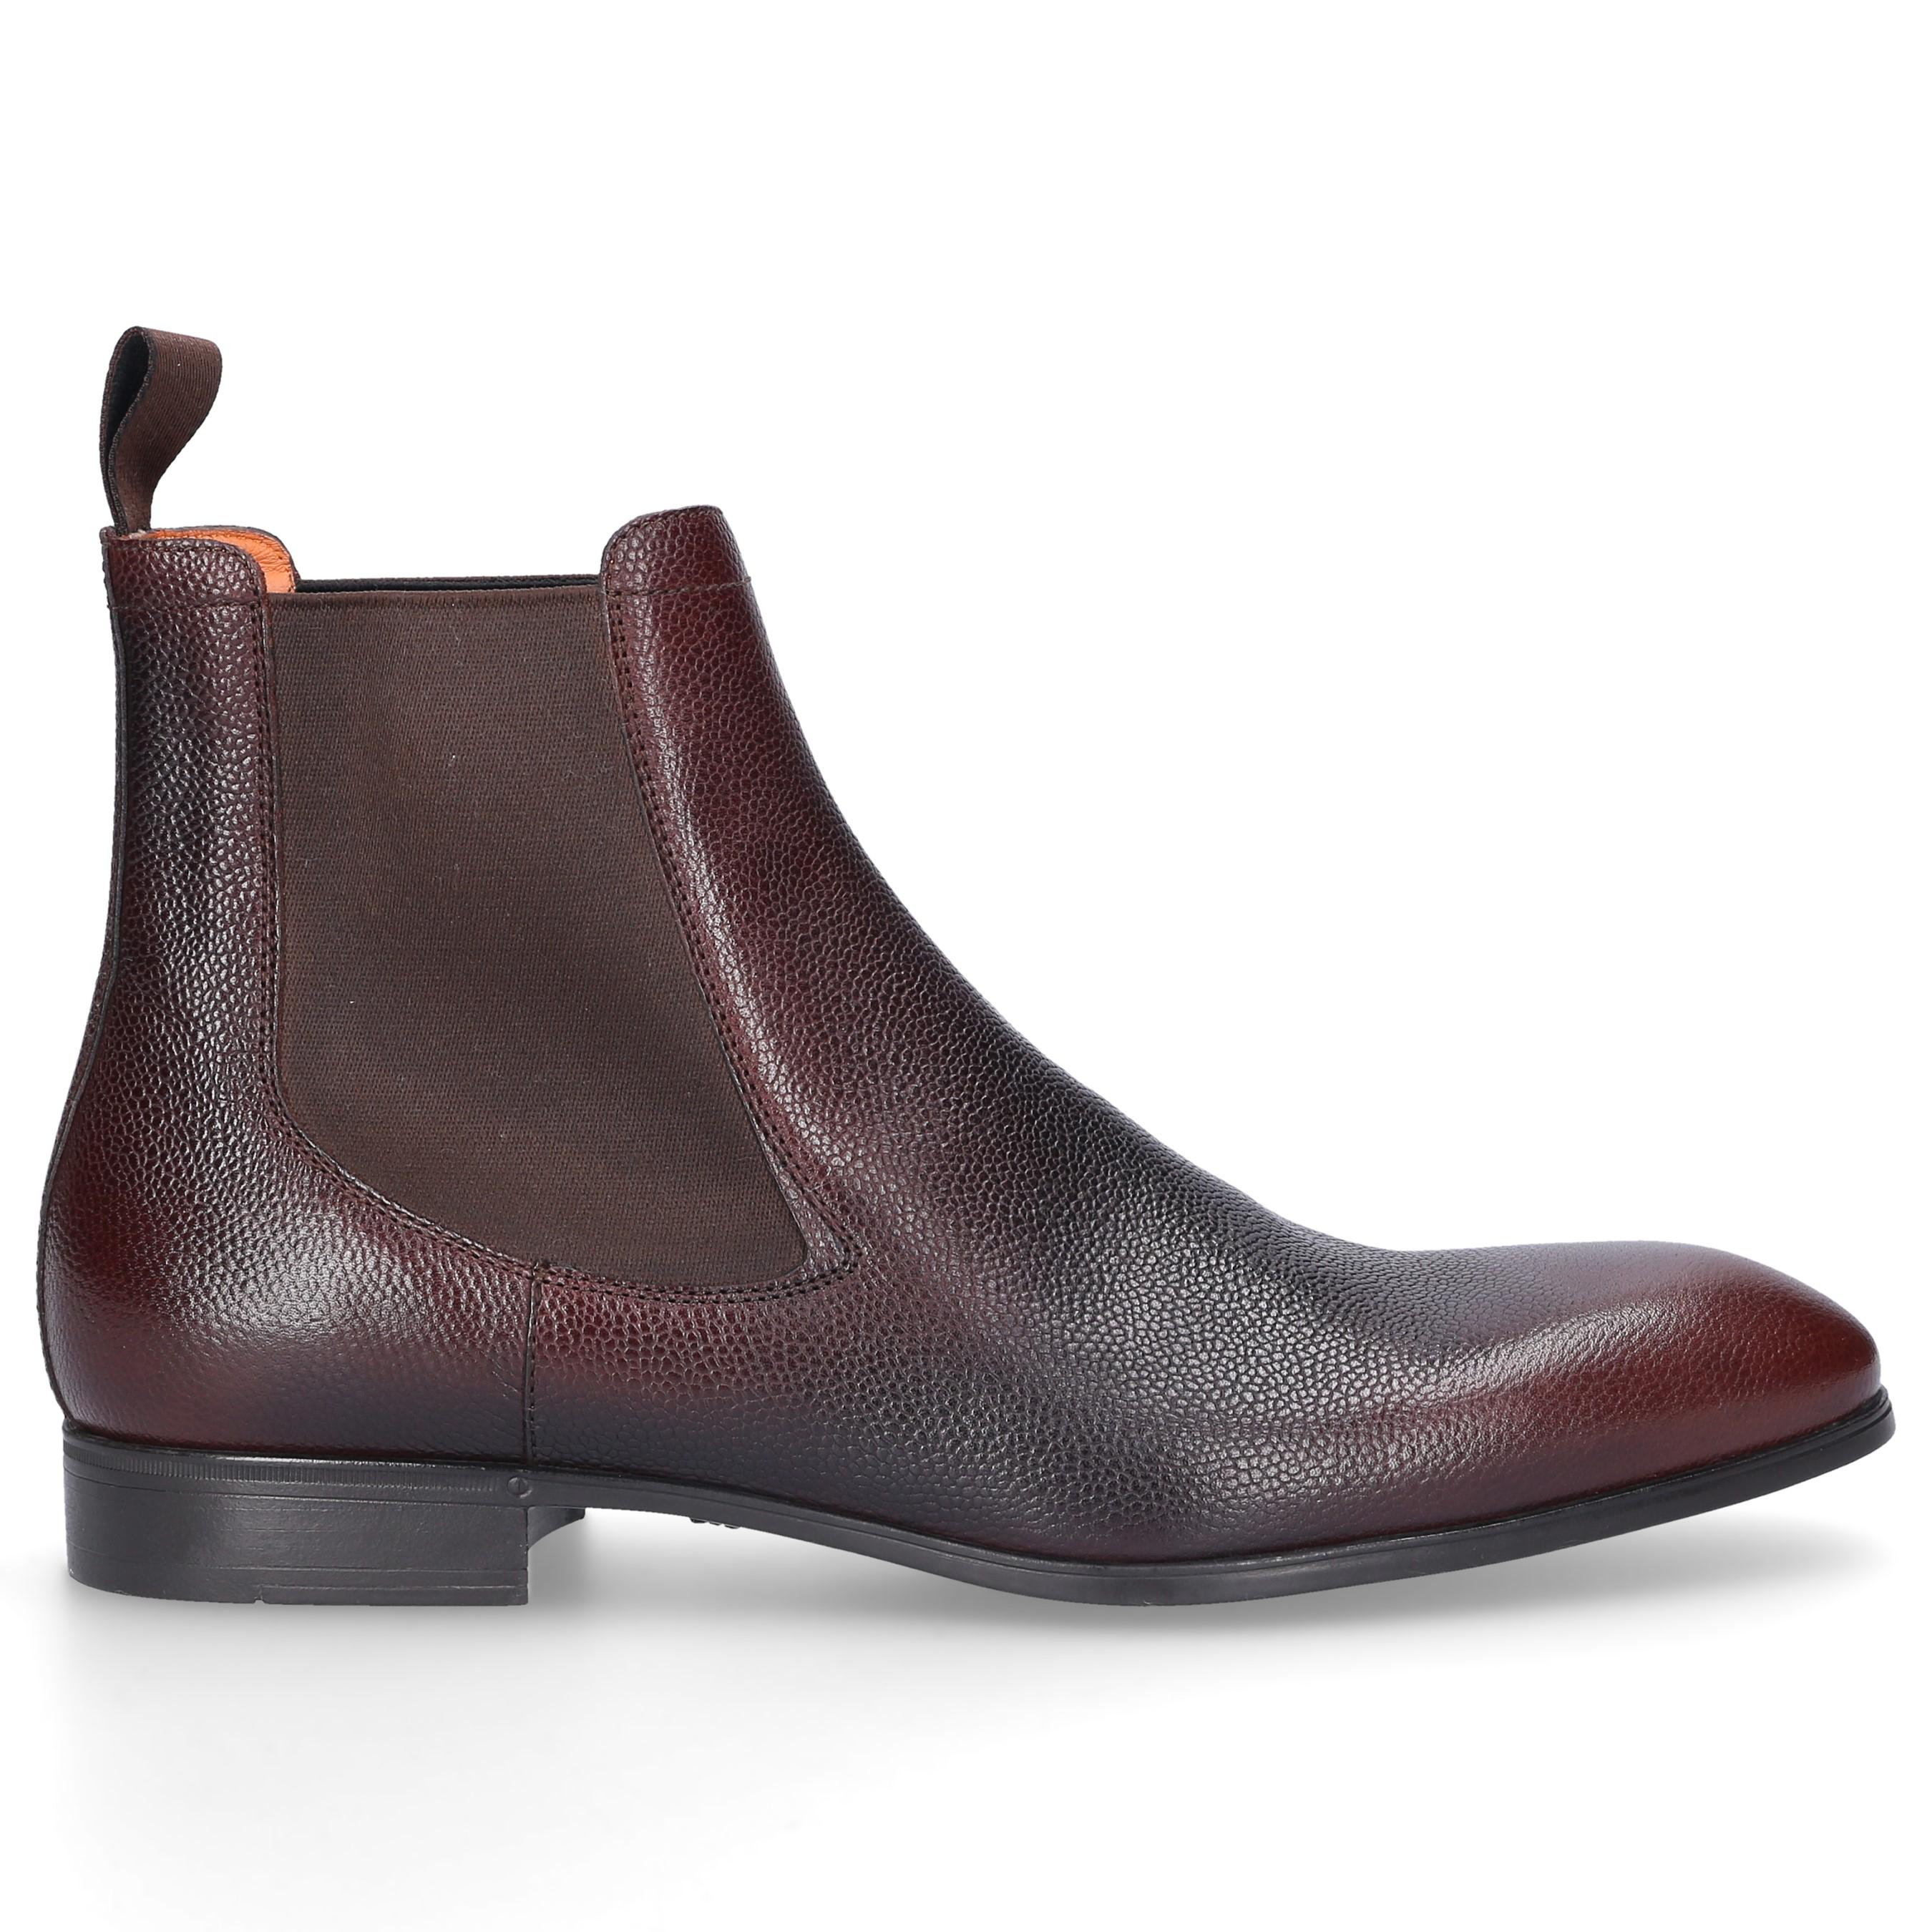 Santoni Leather Chelsea Boots 13414 in Brown for Men - Lyst